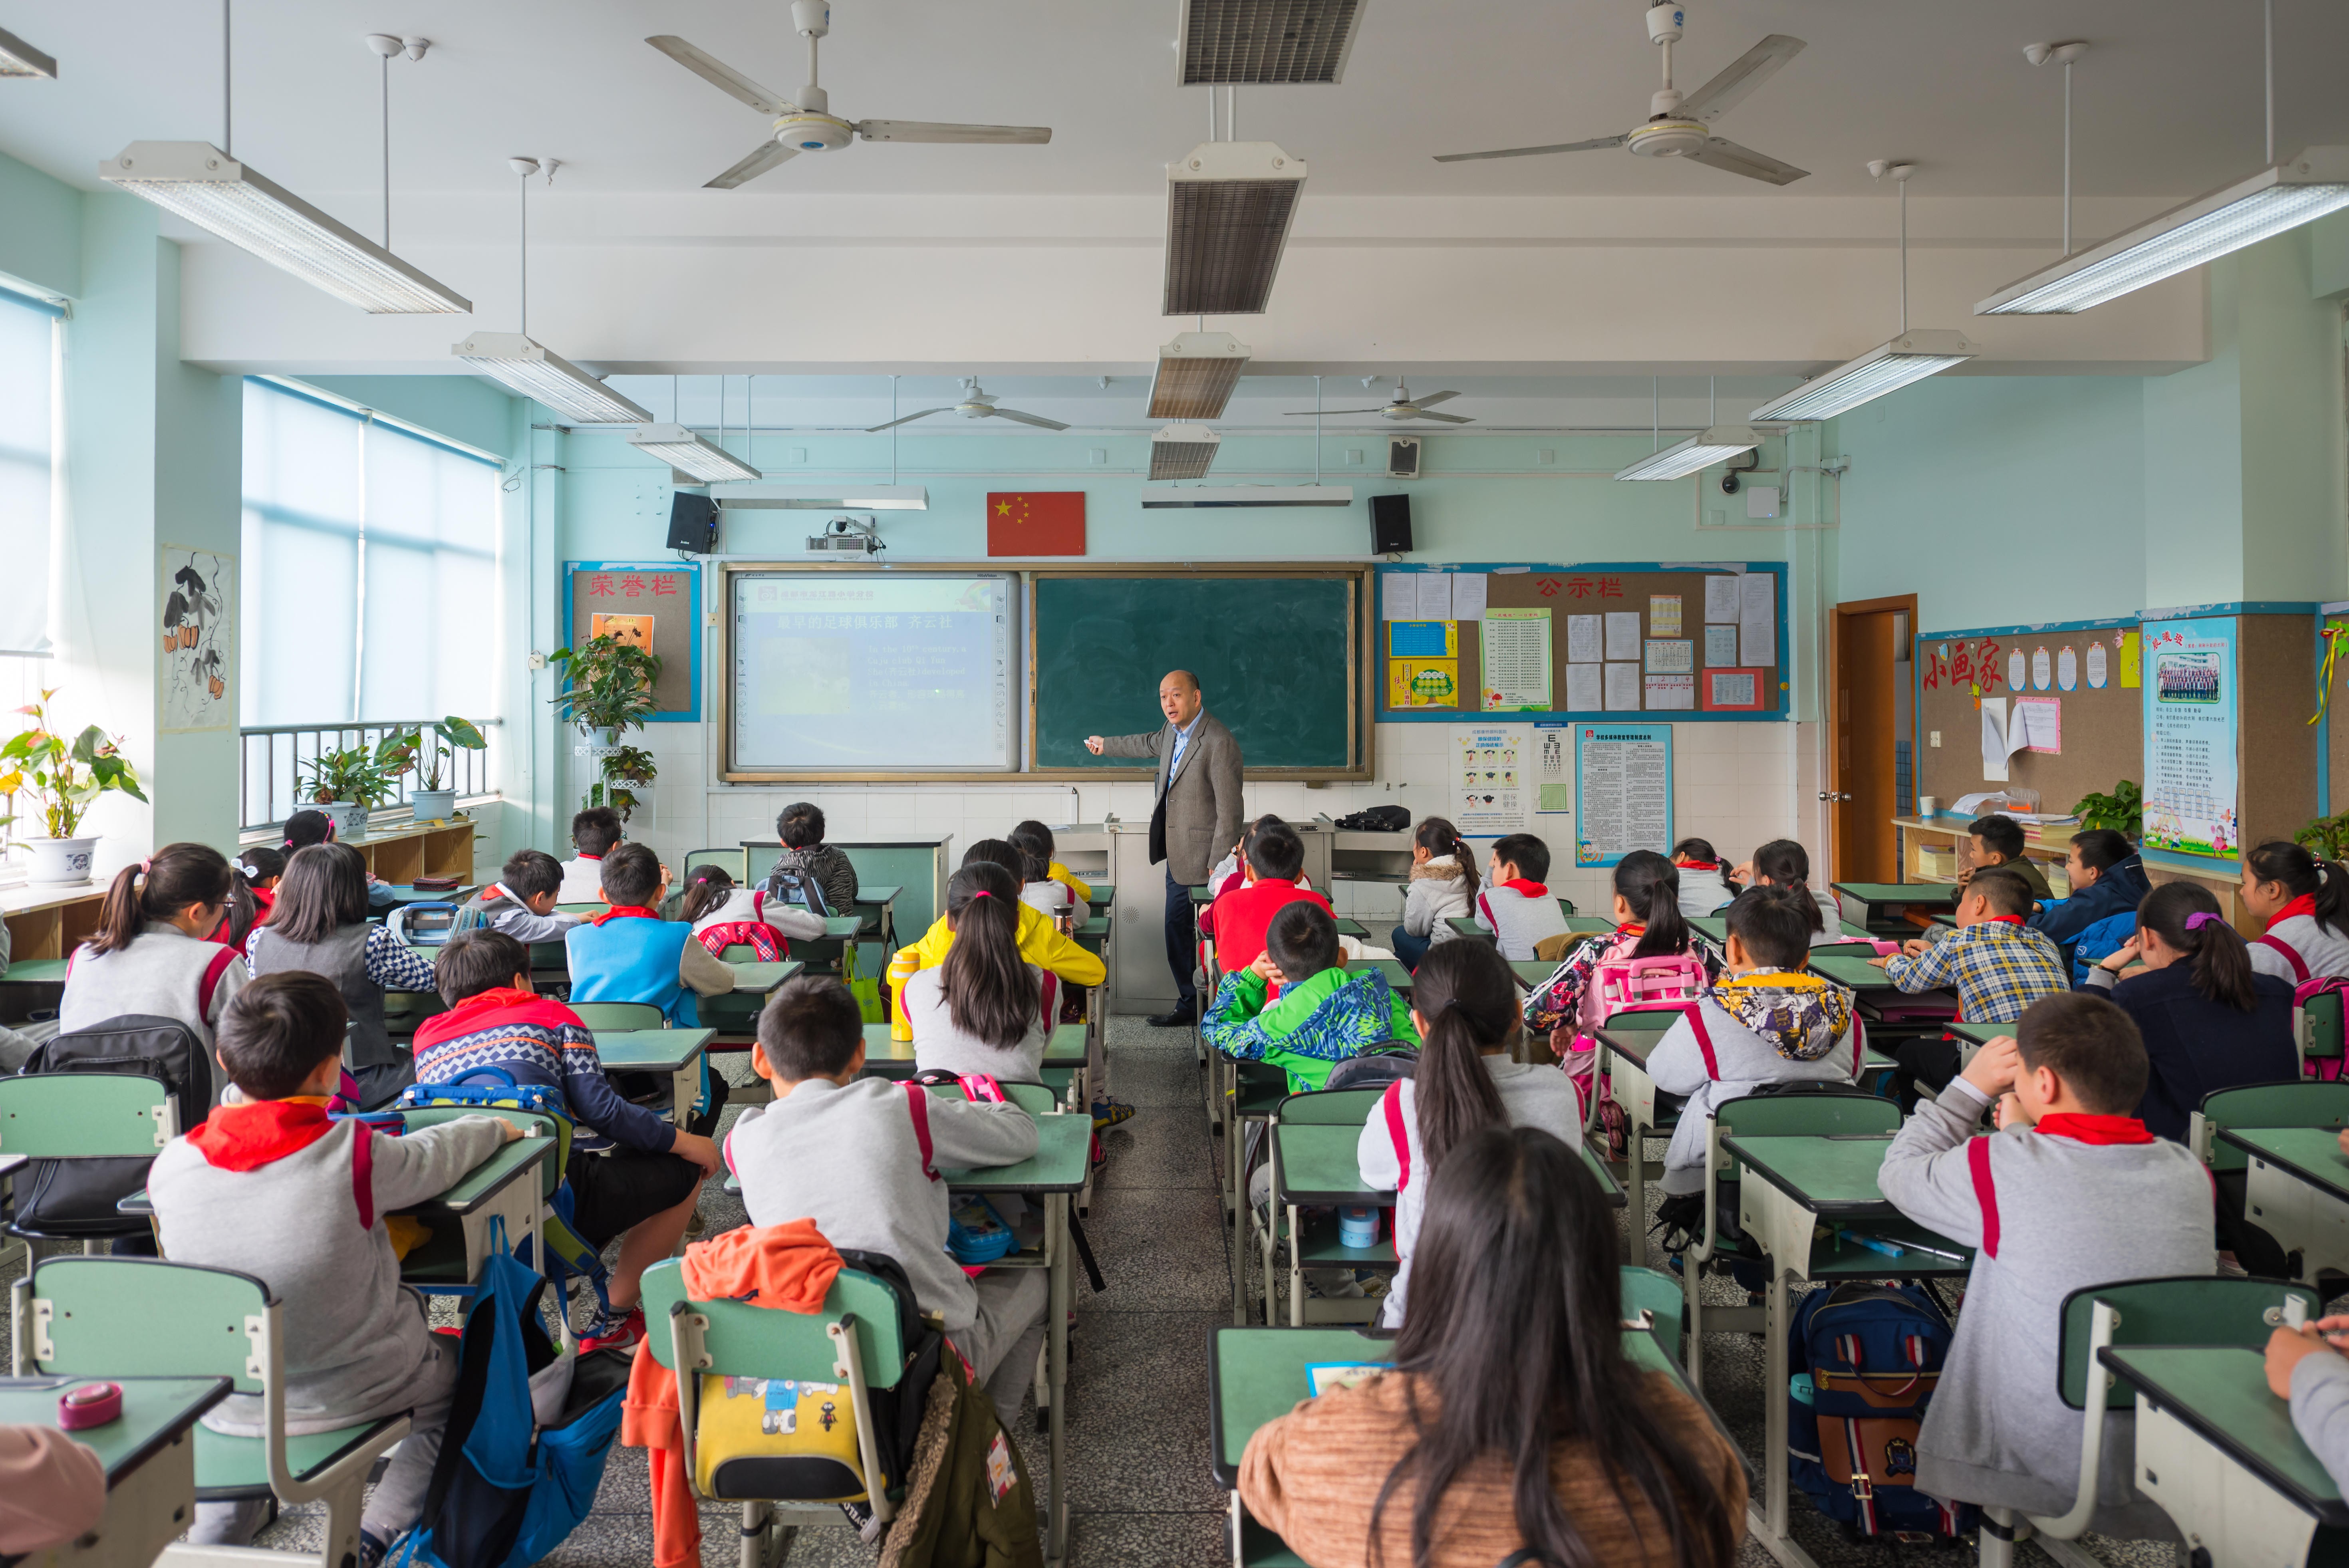 The mainland, with its much lower cost of living, beckons for Hong Kong teachers squeezed out of the city by fierce competition.